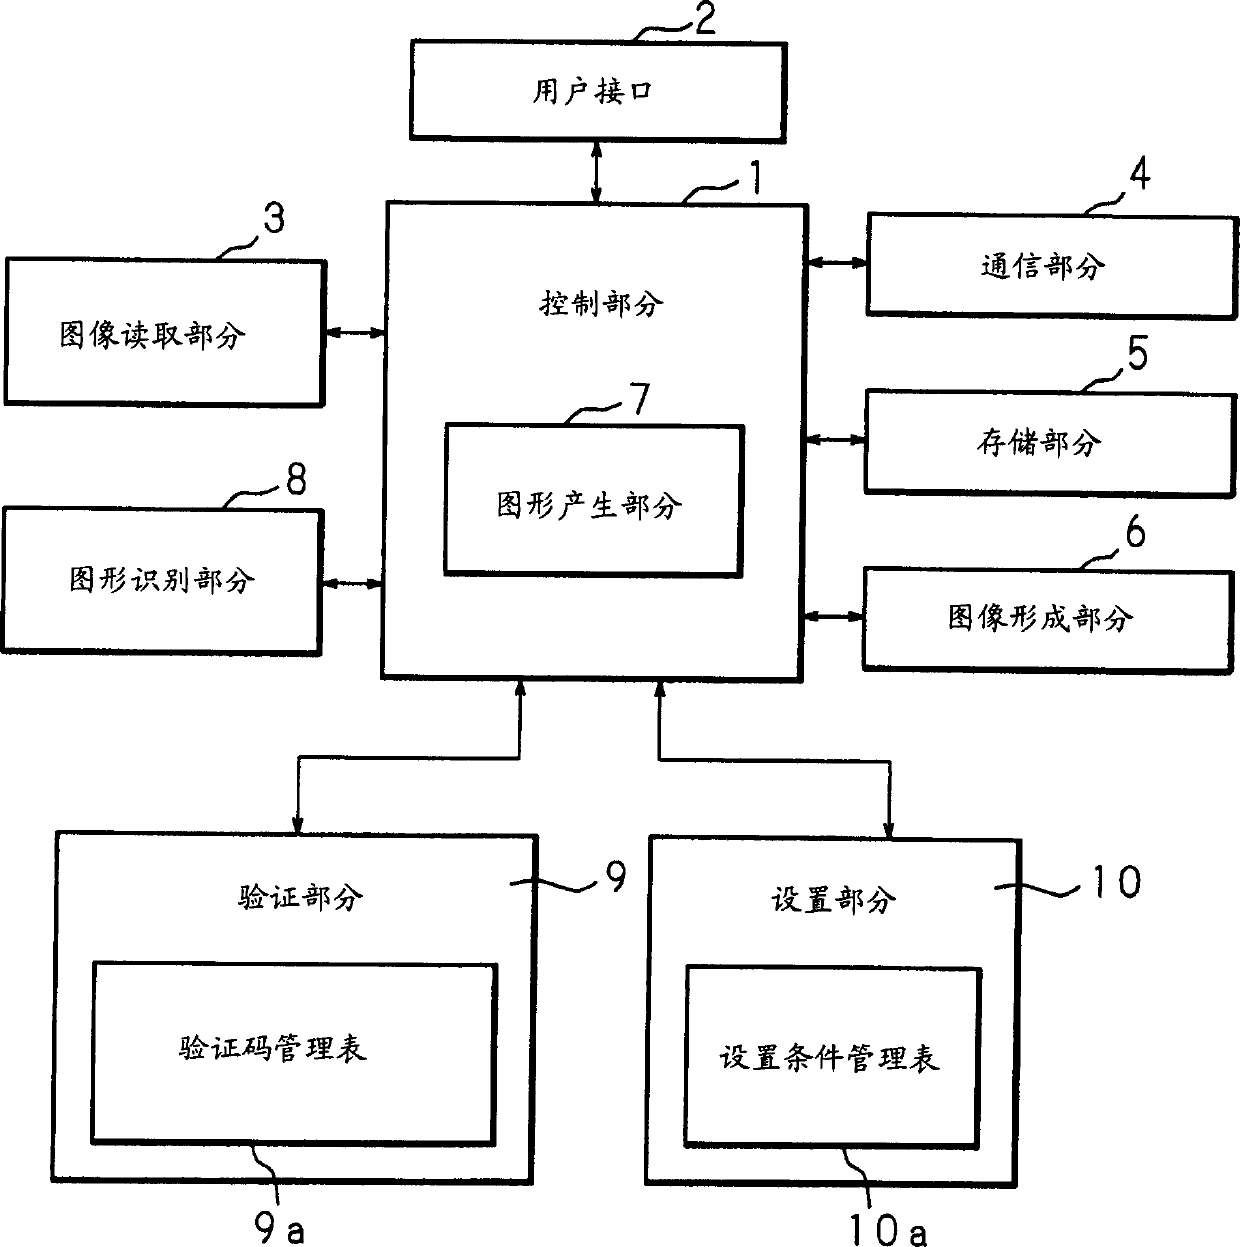 Image reading apparatus, image processing system, and image recording apparatus